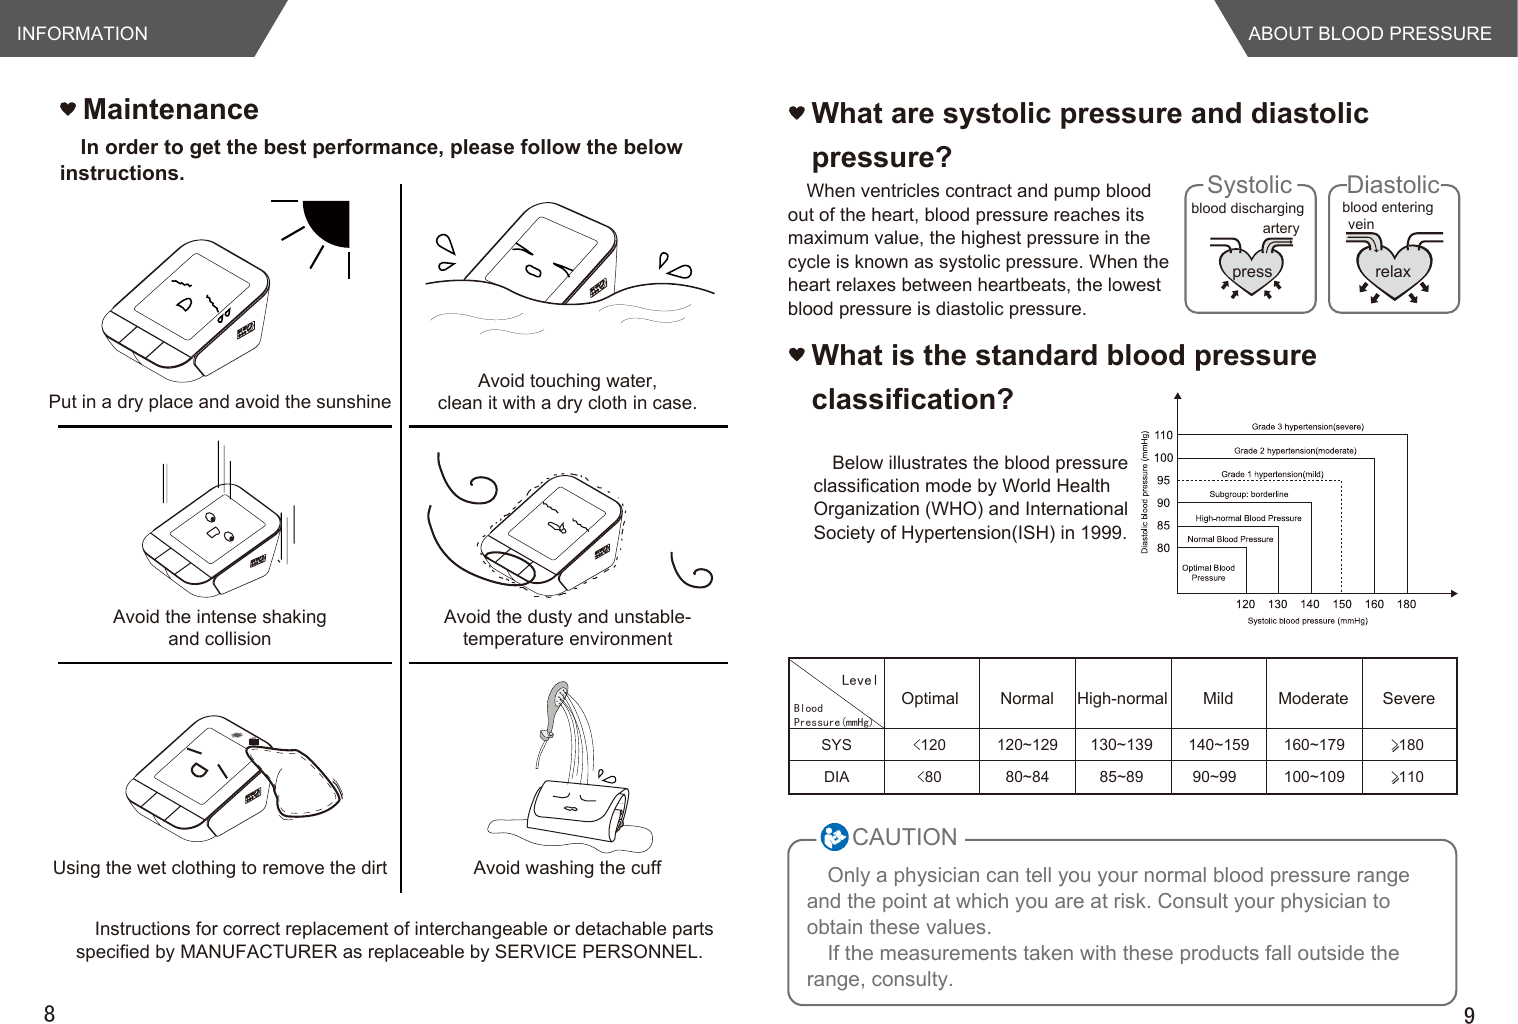 98ABOUT BLOOD PRESSUREWhen ventricles contract and pump blood out of the heart, blood pressure reaches its maximum value, the highest pressure in the cycle is known as systolic pressure. When the heart relaxes between heartbeats, the lowest blood pressure is diastolic pressure.What are systolic pressure and diastolic pressure?Below illustrates the blood pressure classification mode by World Health Organization (WHO) and International Society of Hypertension(ISH) in 1999. What is the standard blood pressureclassification?Only a physician can tell you your normal blood pressure range and the point at which you are at risk. Consult your physician to obtain these values.If the measurements taken with these products fall outside the range, consulty.LevelBlood Pressure(mmHg)SYSDIA&lt;120&lt;80120~12980~84130~13985~89140~15990~99160~179100~109&gt;180&gt;110Optimal Normal High-normal Mild Moderate SevereCAUTIONINFORMATIONMaintenanceIn order to get the best performance, please follow the below instructions.Put in a dry place and avoid the sunshineAvoid the intense shakingand collisionUsing the wet clothing to remove the dirtAvoid touching water,clean it with a dry cloth in case.Avoid the dusty and unstable-temperature environmentAvoid washing the cuffpressartery veinblood dischargingSystolicrelaxblood enteringDiastolic  Instructions for correct replacement of interchangeable or detachable parts specified by MANUFACTURER as replaceable by SERVICE PERSONNEL.